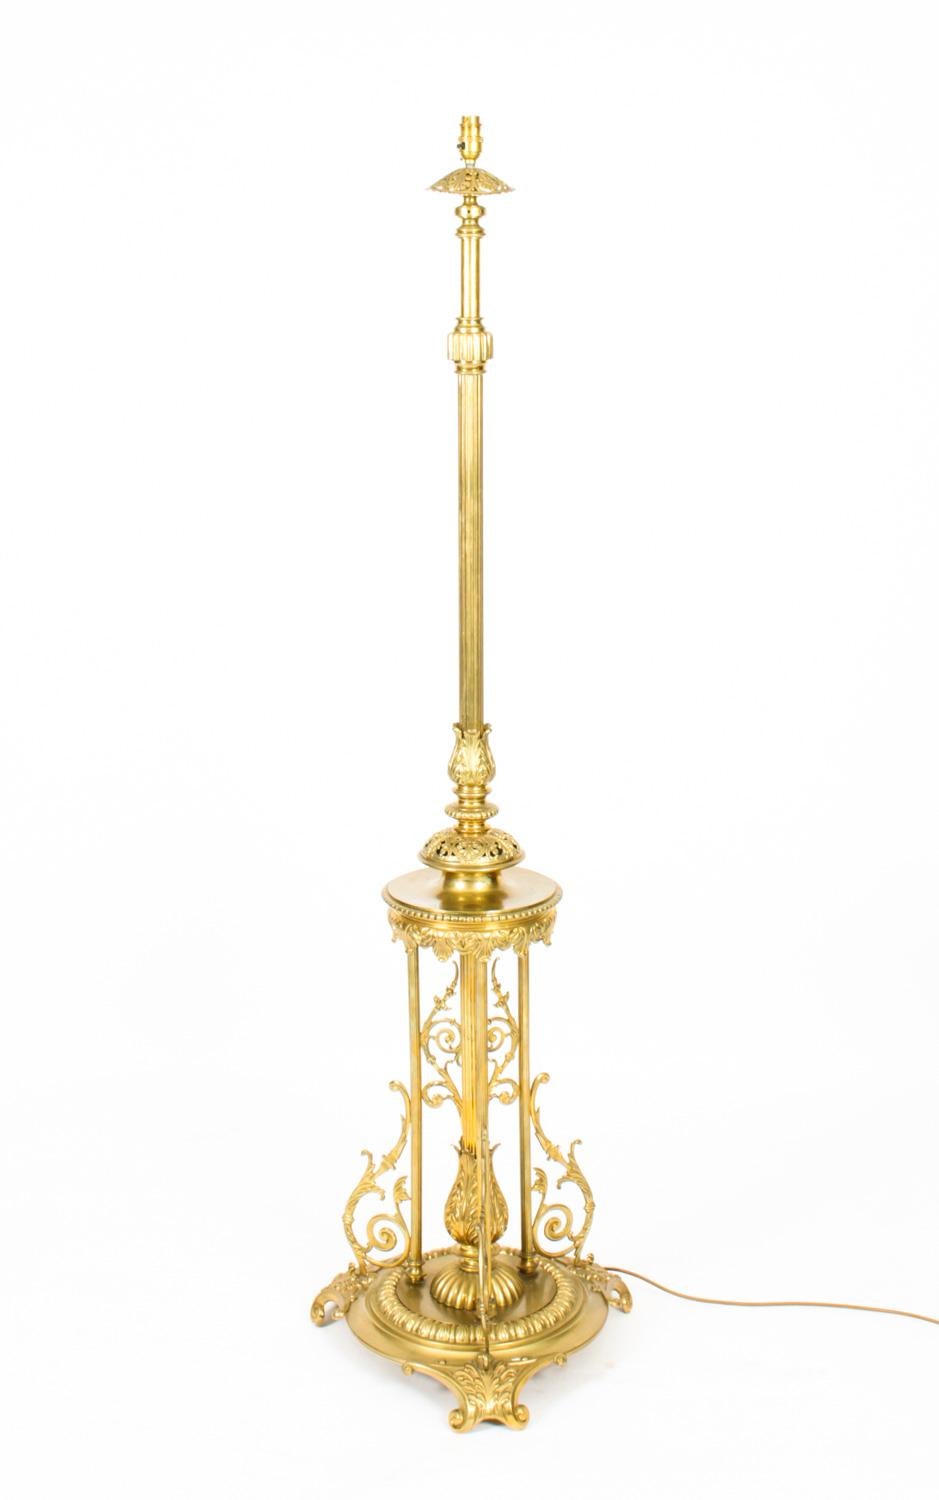 This is a highly attractive and exhibition quality antique Victorian telescopic brass floor standard lamp now converted to electricity, circa 1890 in date.

This splendid lamp features a distinguished cylindrical reeded column decorated with